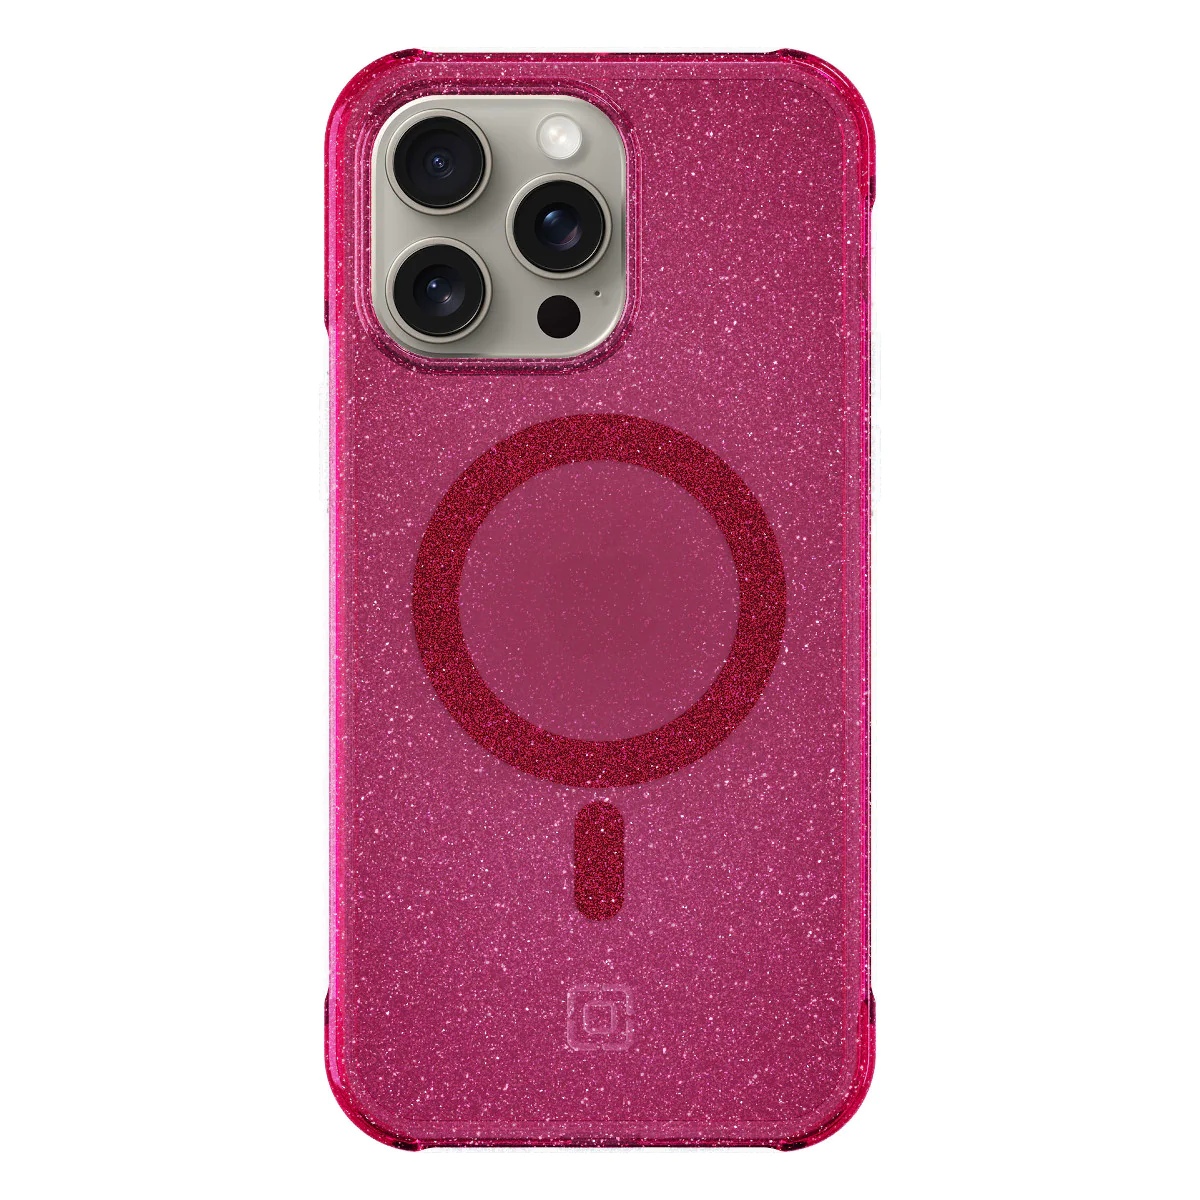 Incipio รุ่น Forme Protective for MagSafe - เคส iPhone 15 Pro Max - Pop Pink Glitter